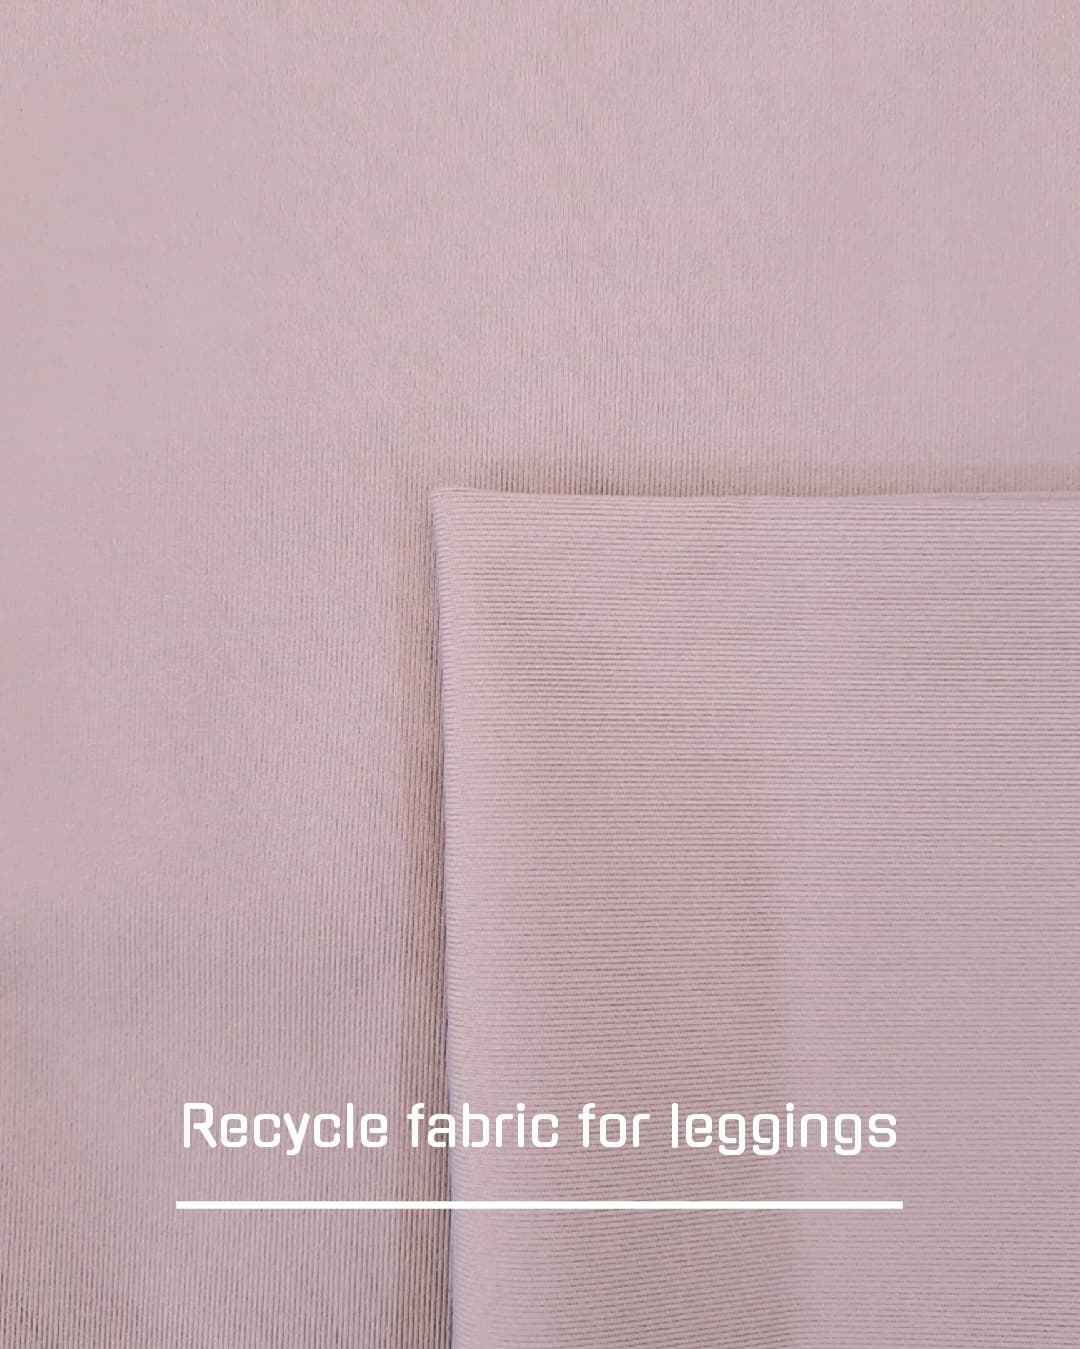 Recycle fabric for leggings